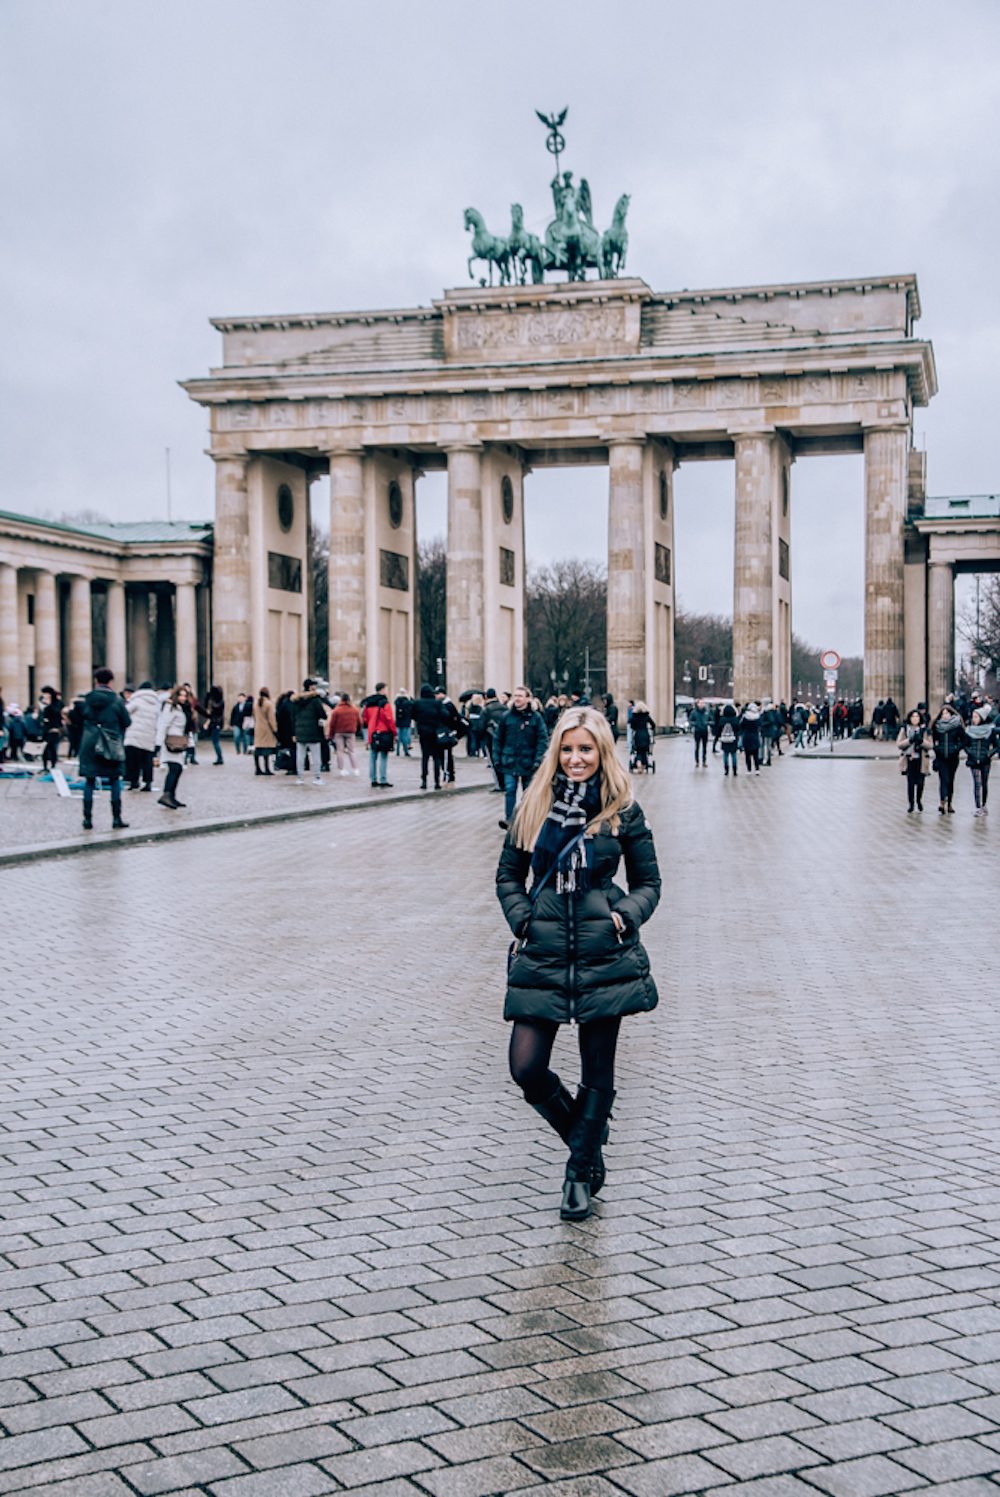 48 hours in Berlin and a Stay at Soho House Berlin - SilverSpoon London